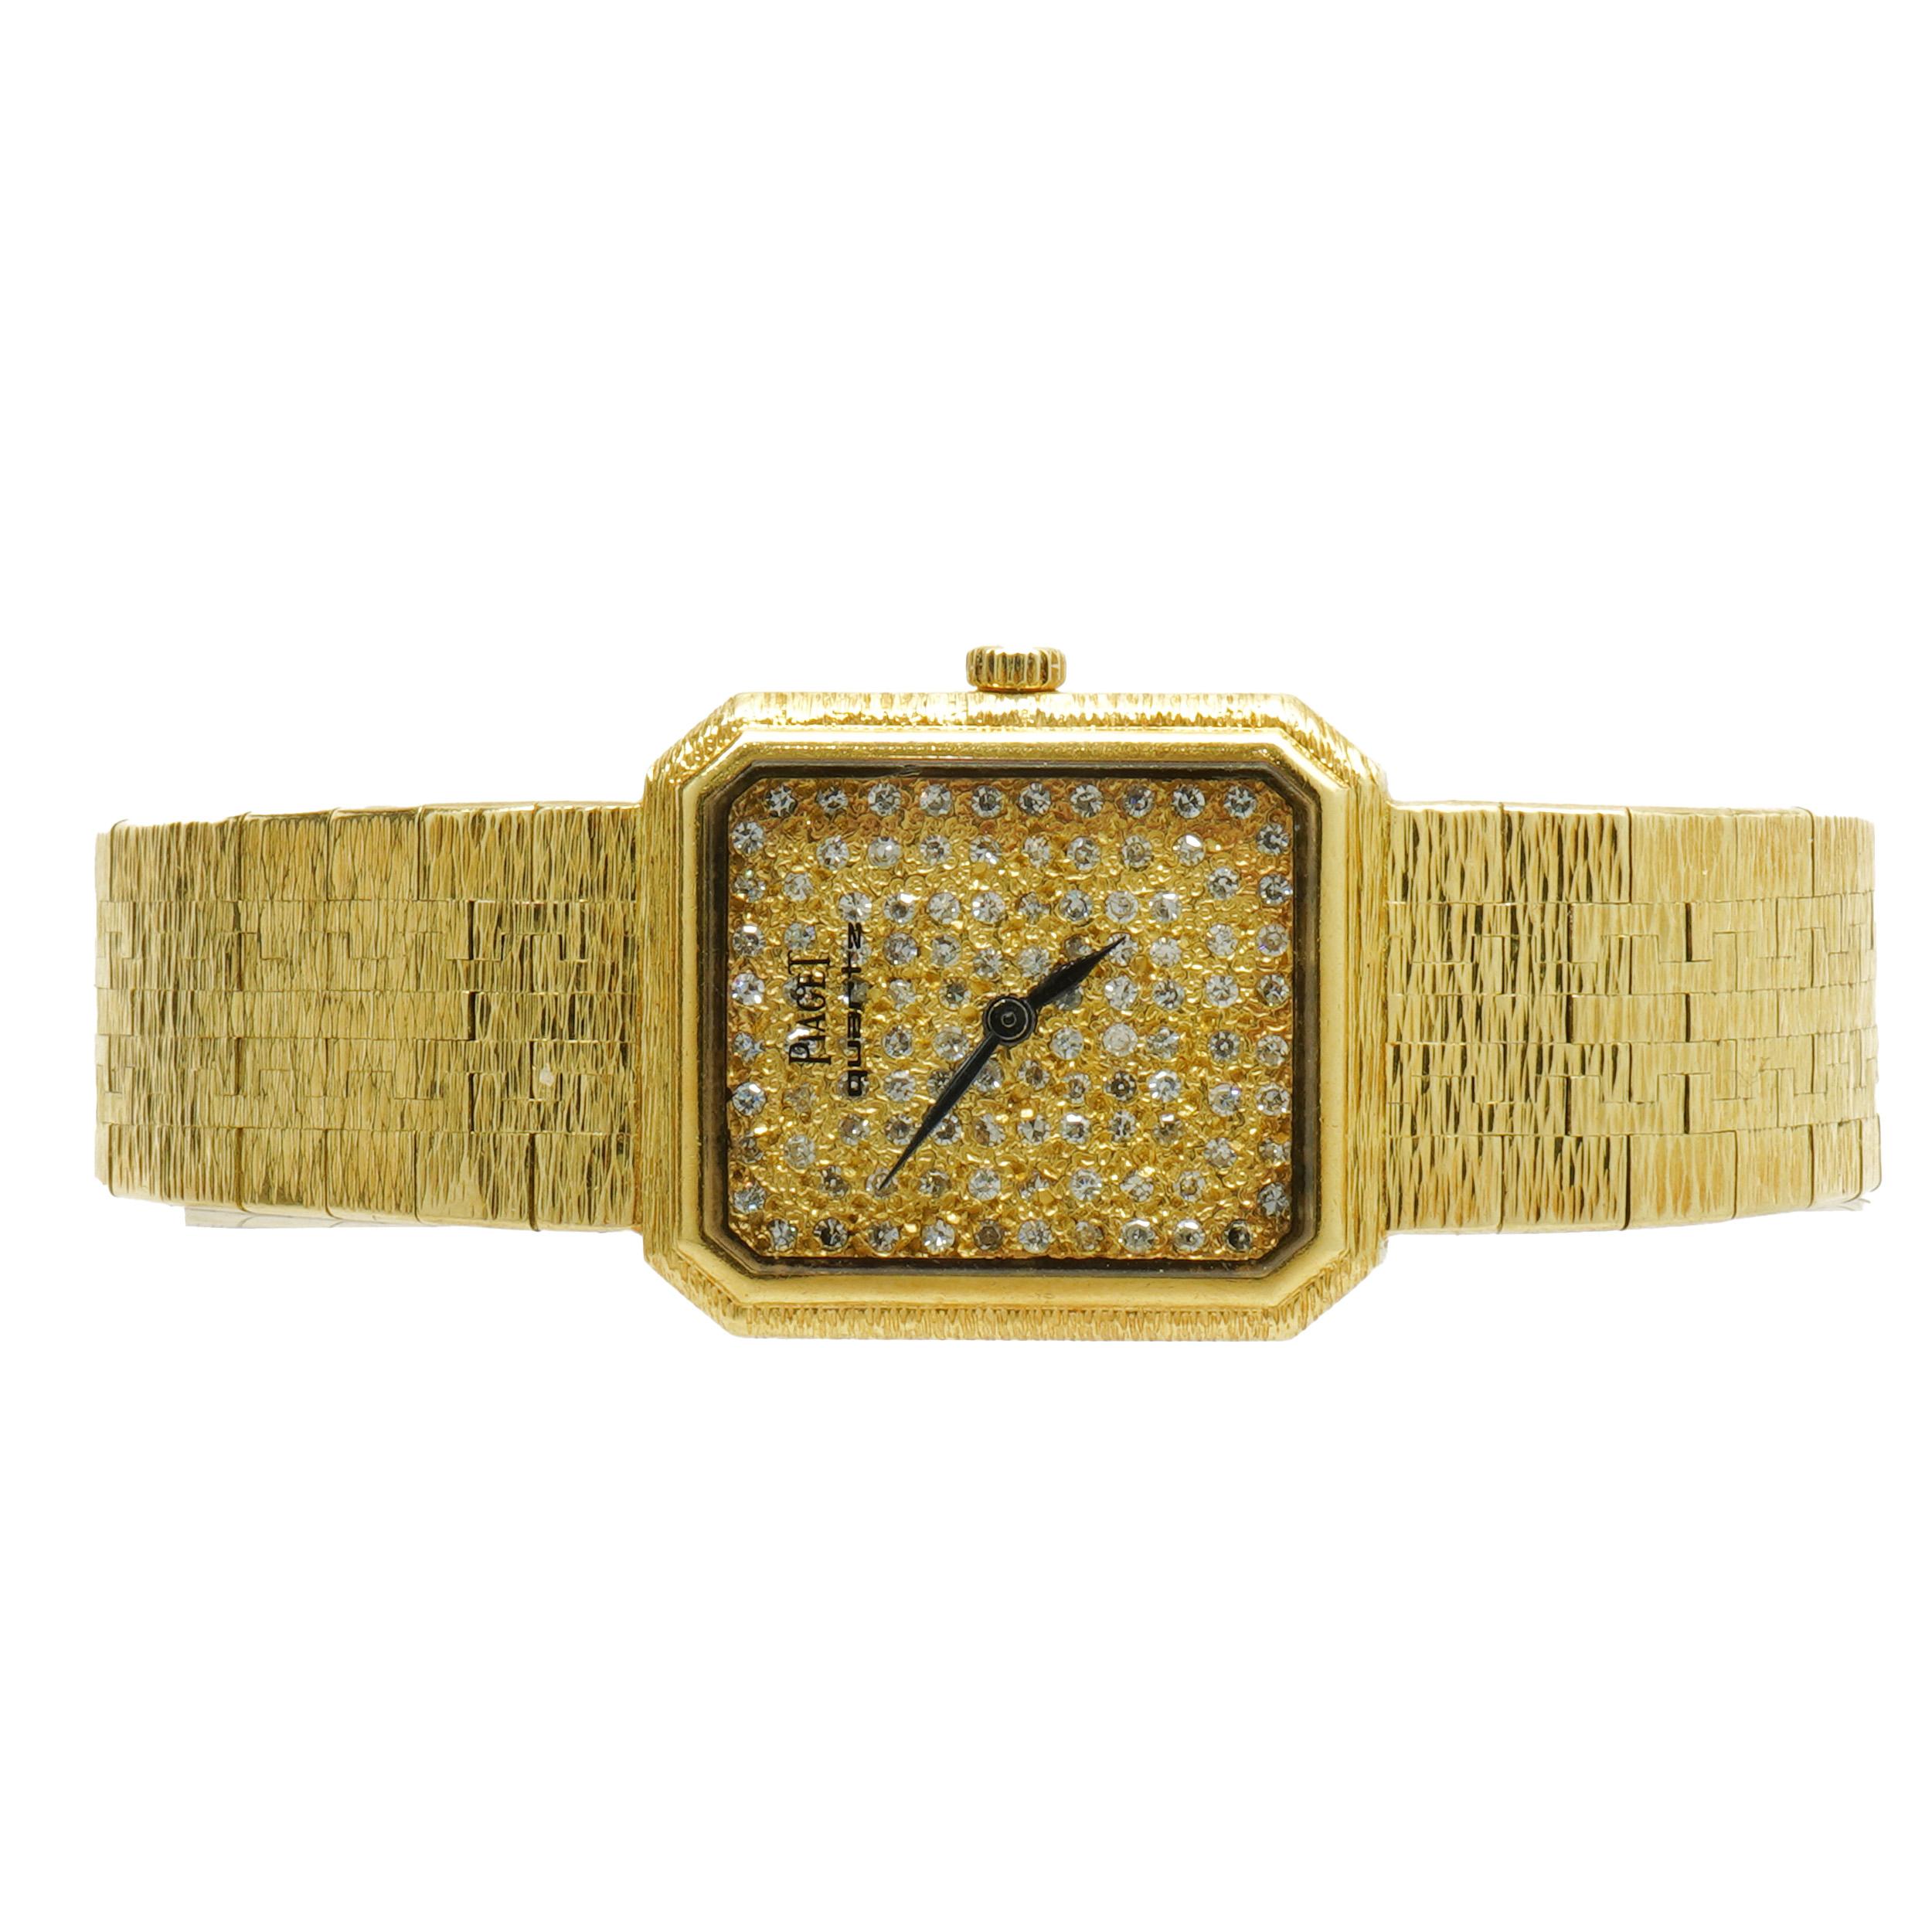 Movement: quartz
Function: hours, minutes
Case: 23x20mm yellow gold square case, scratch resistant sapphire crystal, push/pull crown
Band: yellow gold Piaget mesh link bracelet 
Dial: champagne diamond dial
Serial: 375XXX
Reference : 8148A6

Does